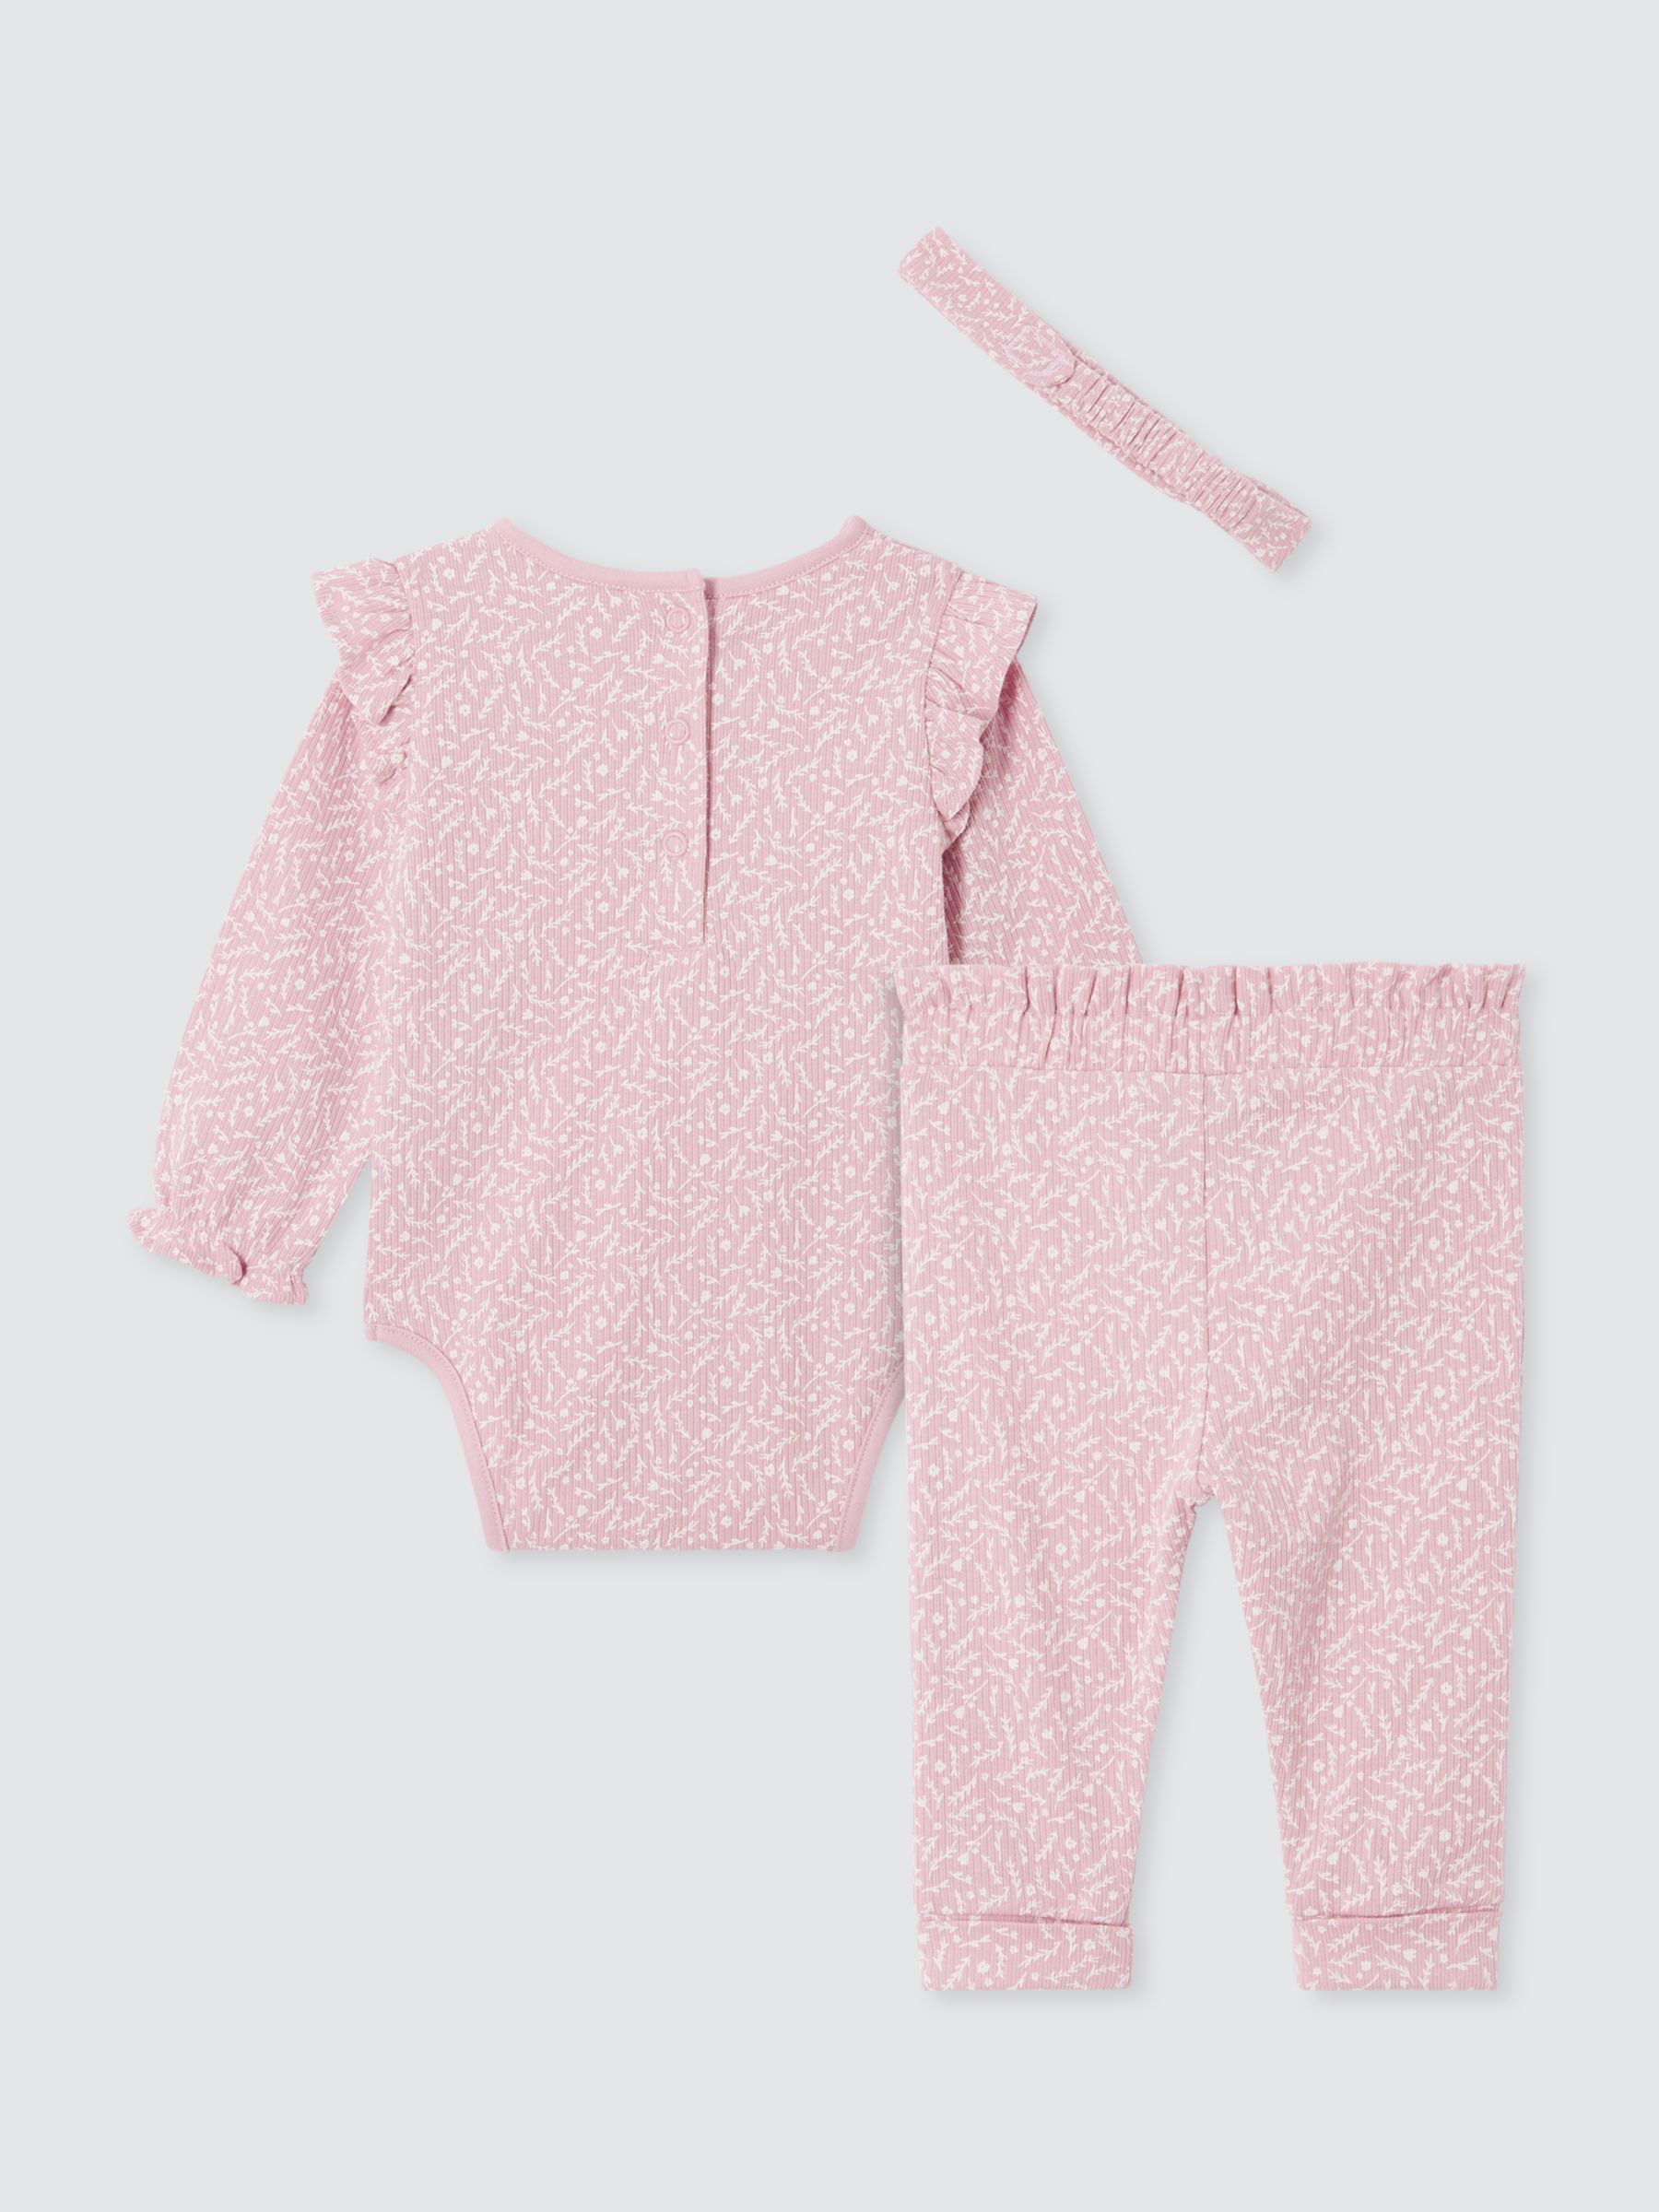 John Lewis Baby Floral Bodysuit, Trousers and Headband Set, Pink, 3-6 months